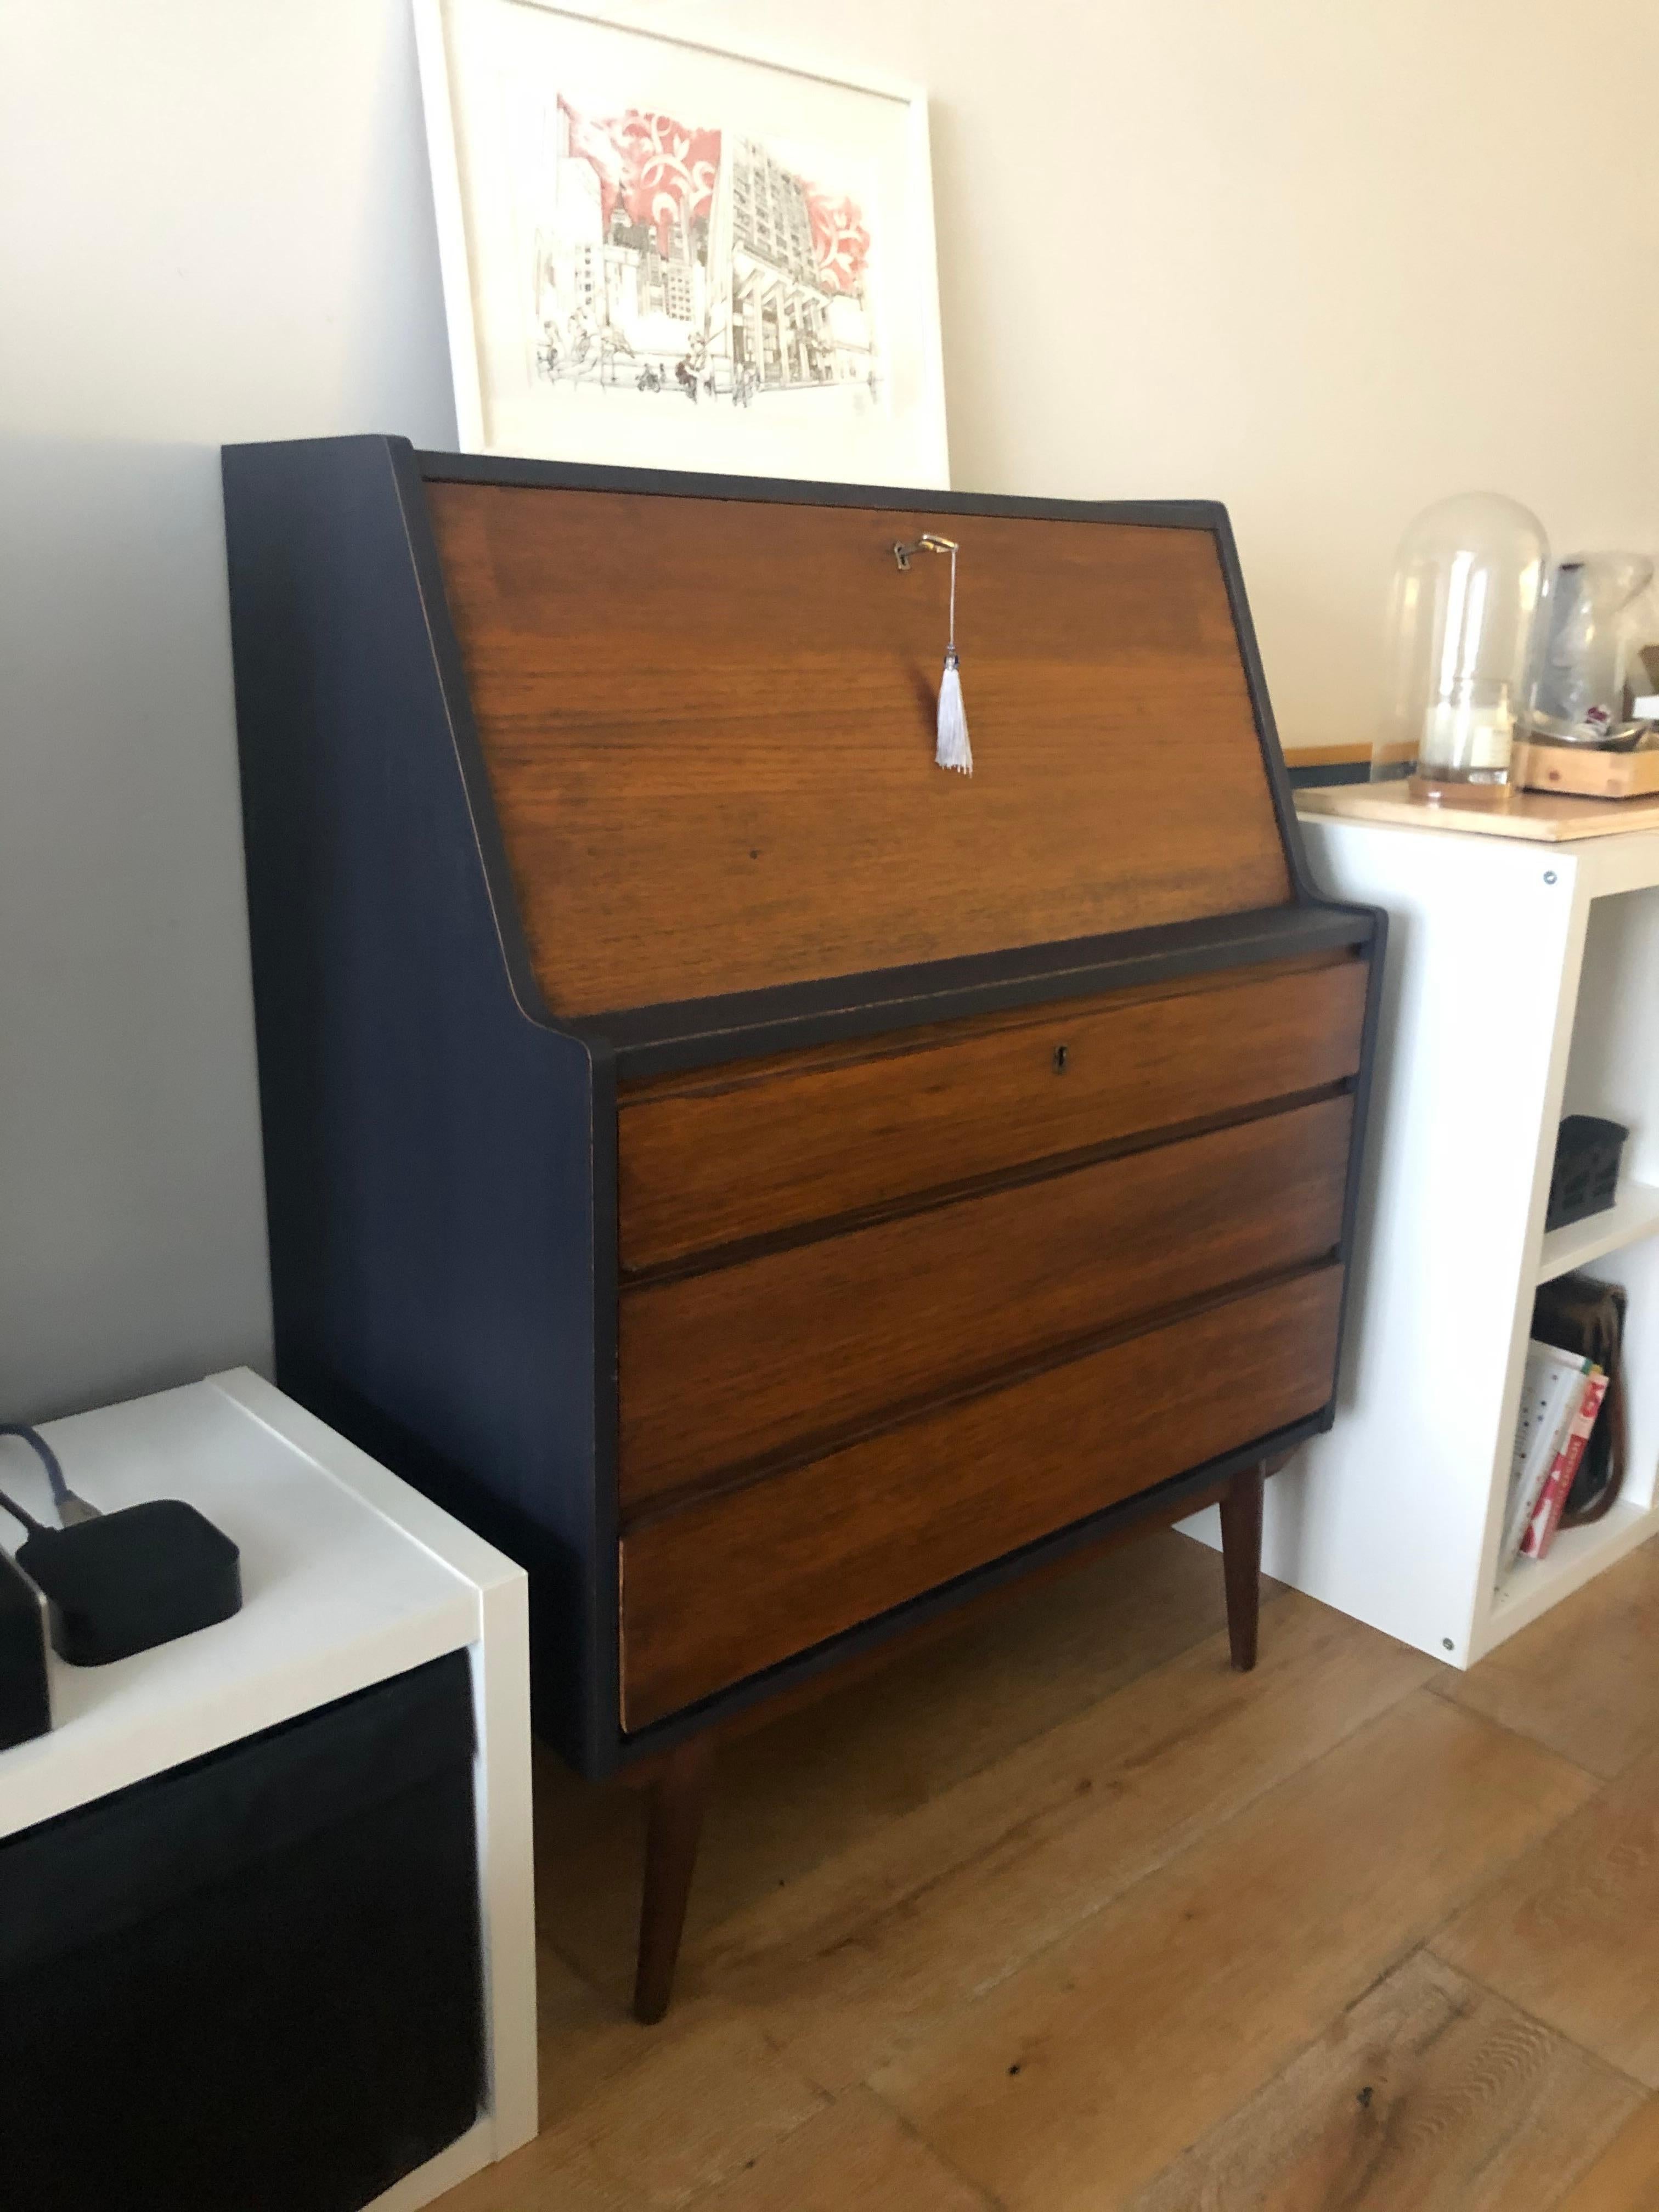 resenting a striking midcentury modern desk meticulously fashioned from solid wood, presently offered in good condition on 1stdibs. Skillfully embellished in the enduring elegance of 